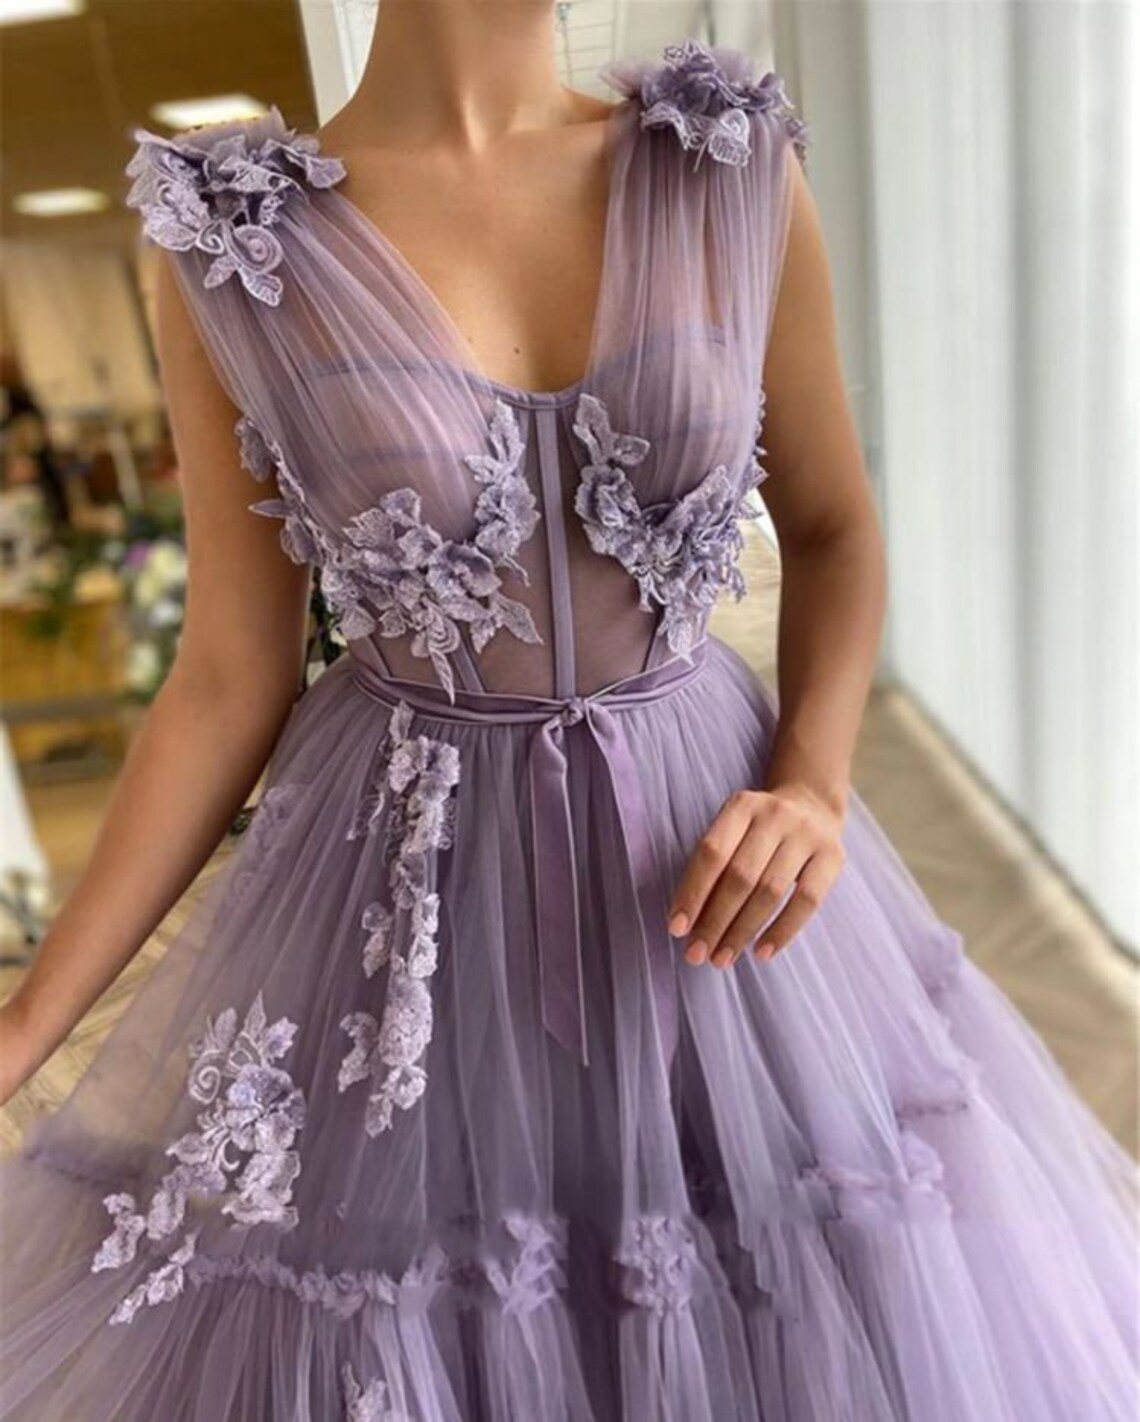 Stunning Lavender Tulle Ruffled Gown, Long Tulle Prom Dress, Tutu Maxi Dress, Bridesmaid Dress, Ball Gown, Corset tulle dress  nv213